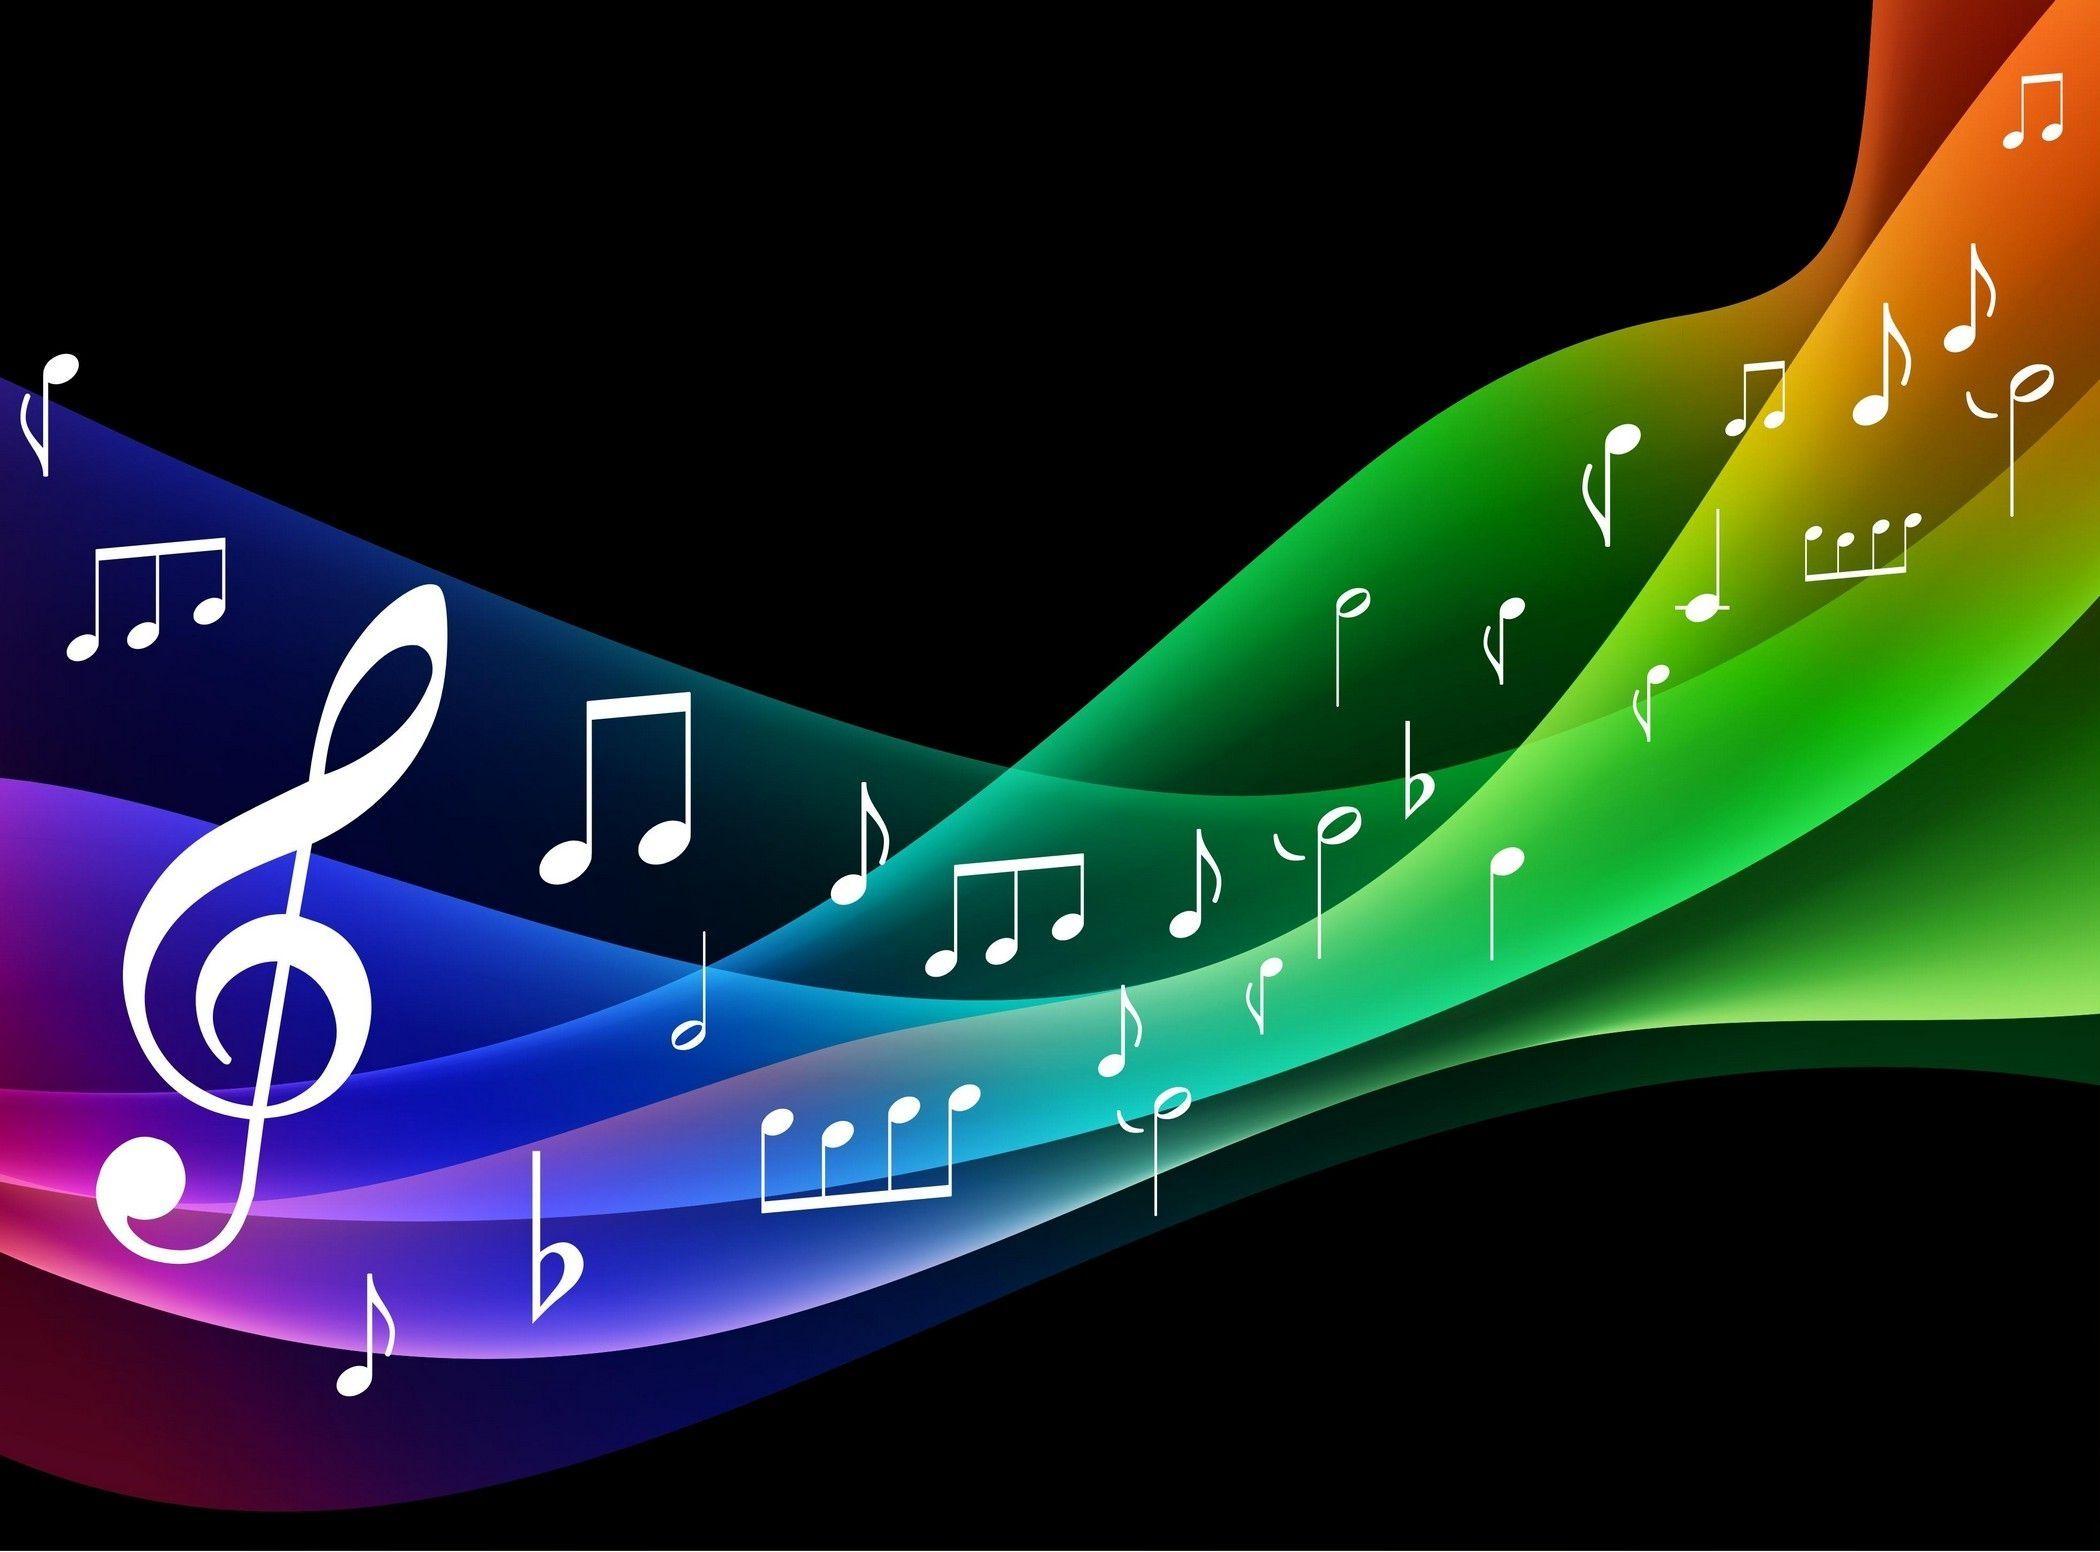 background image about music HD Music Background Image